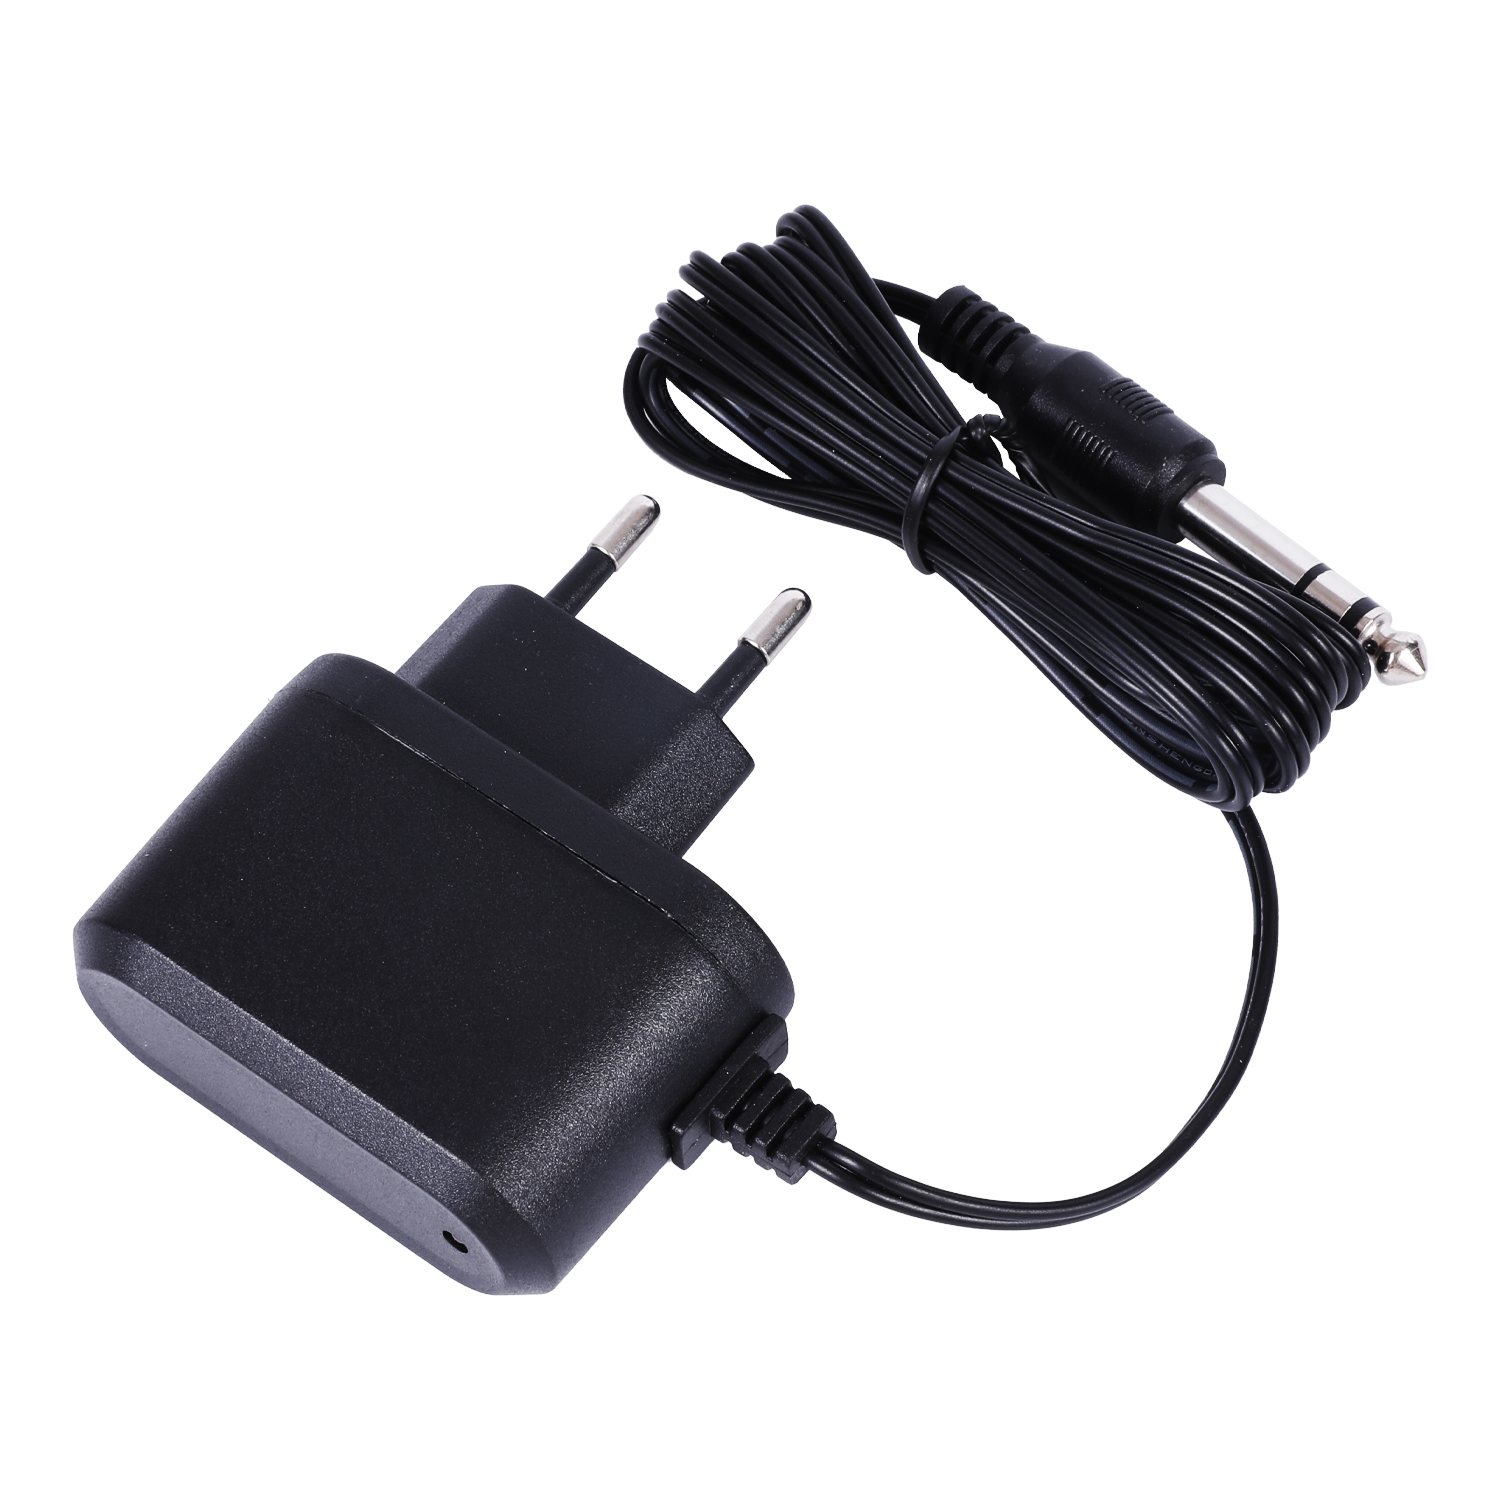 Travel charger 5V 3A ac dc power adap...